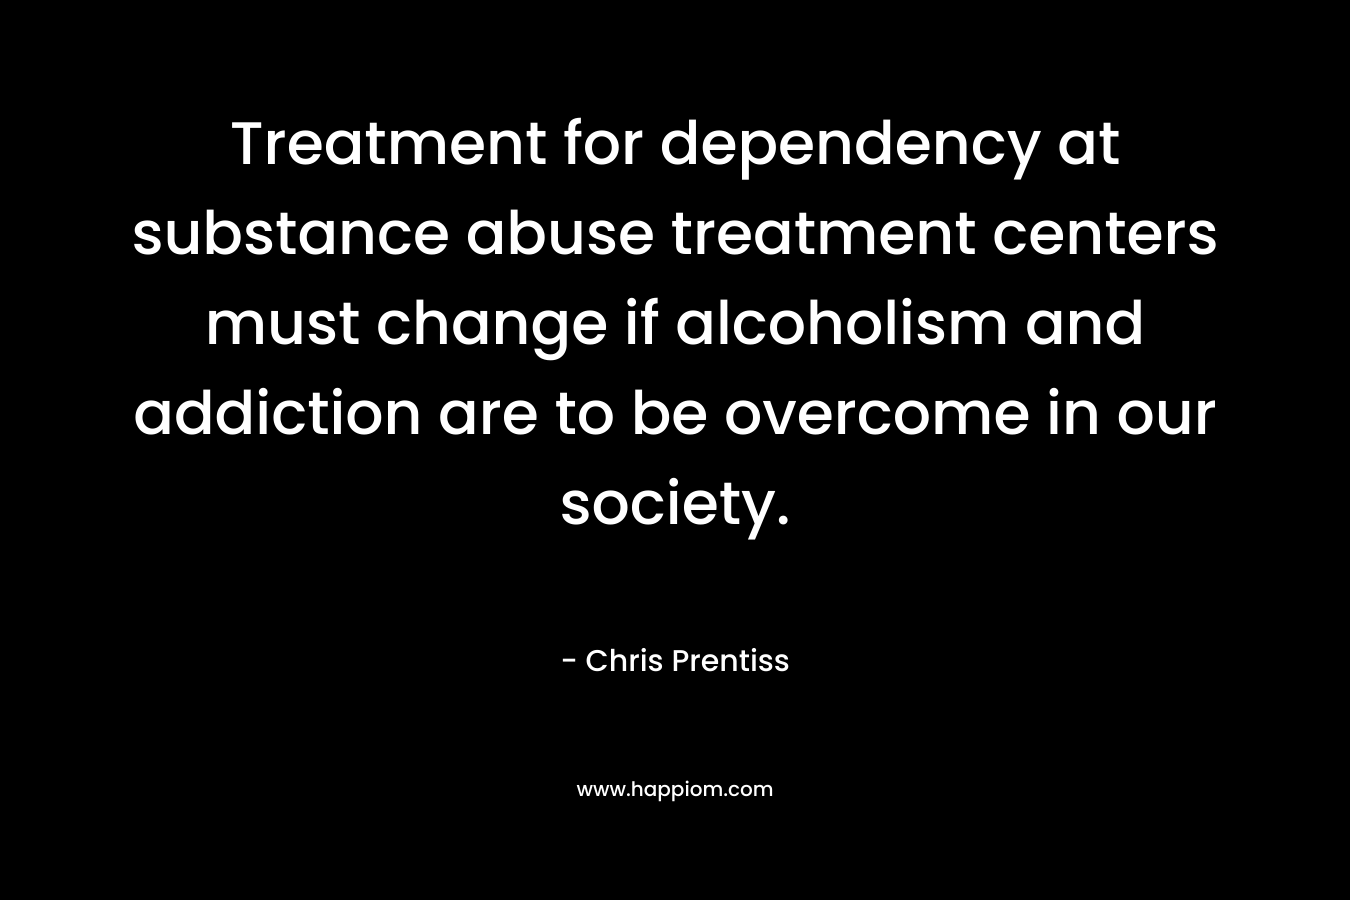 Treatment for dependency at substance abuse treatment centers must change if alcoholism and addiction are to be overcome in our society. – Chris Prentiss